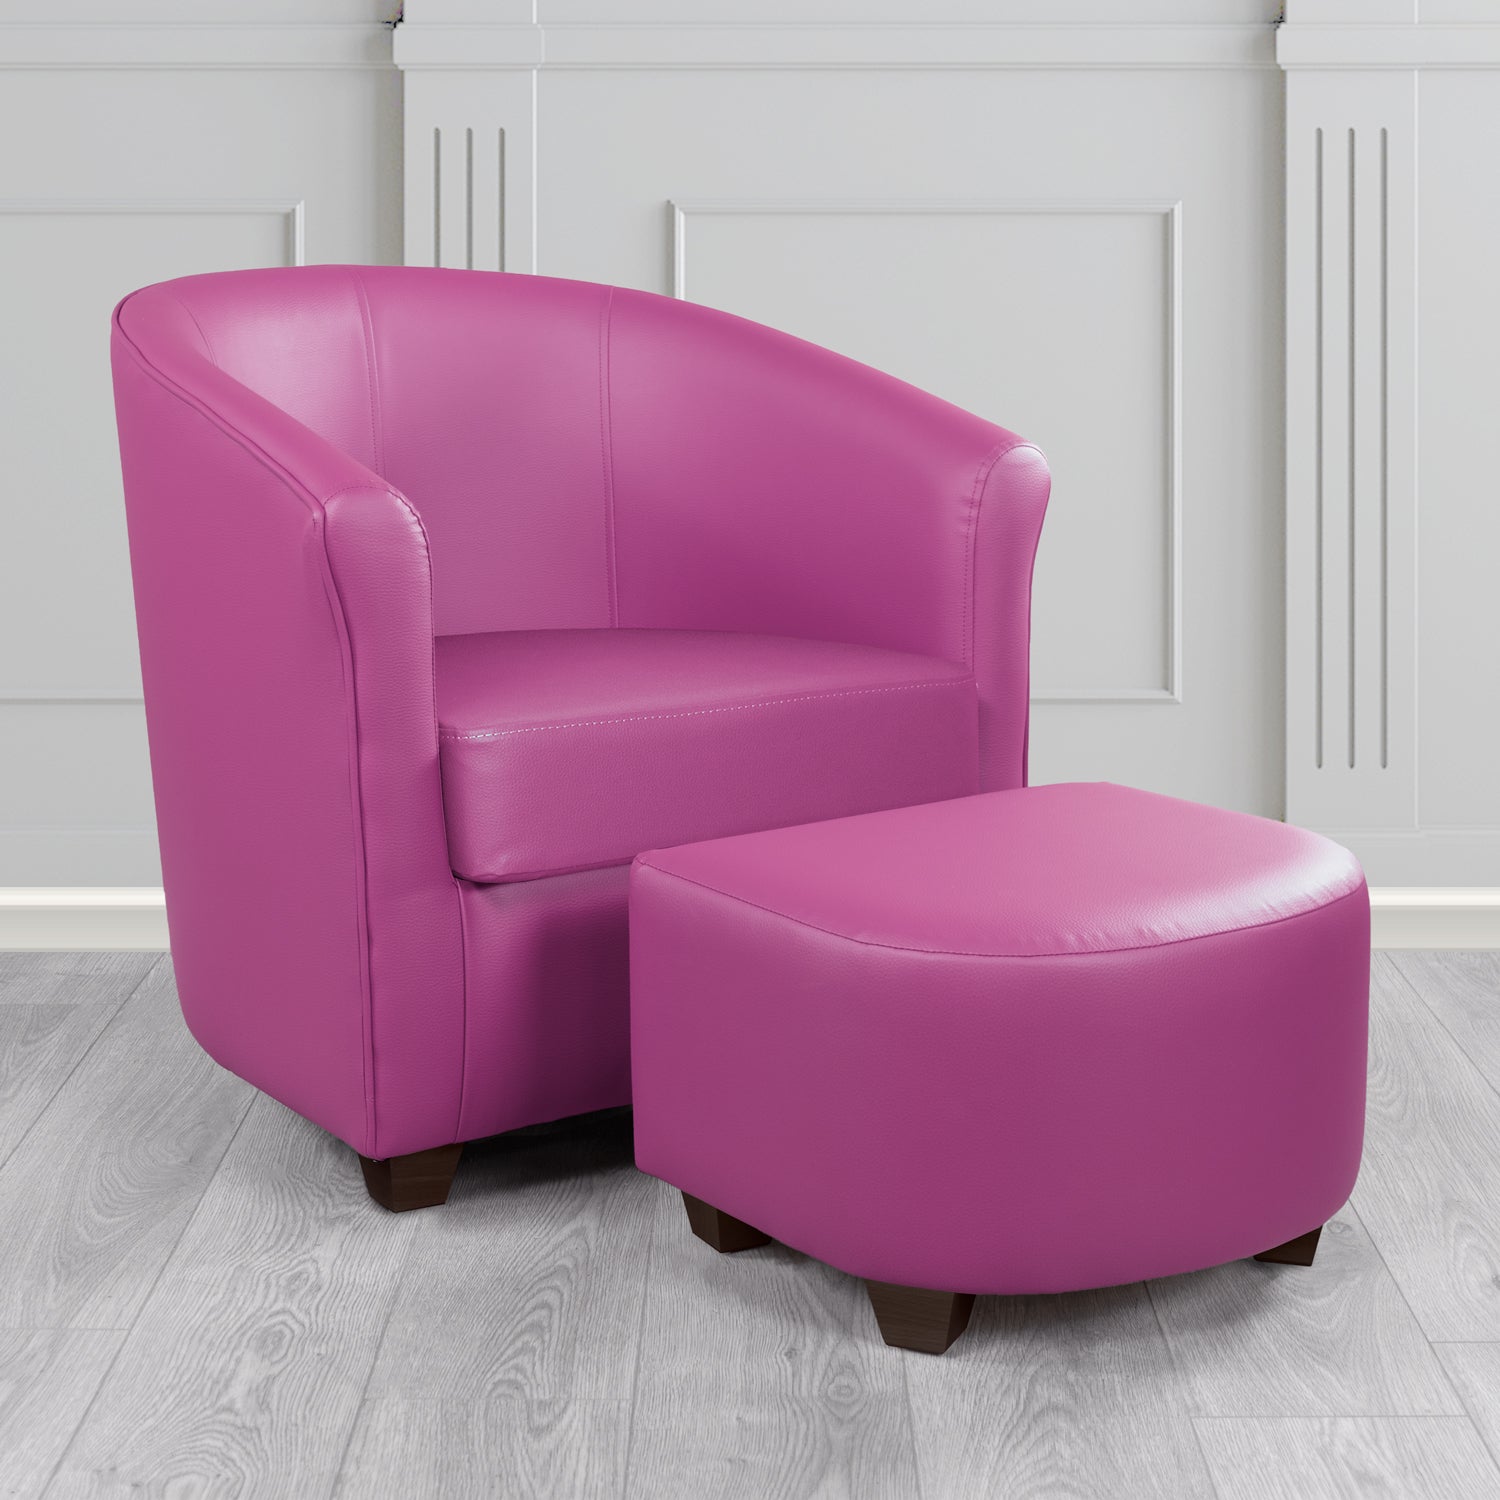 Cannes Tub Chair with Footstool Set in Just Colour Fuchsia Crib 5 Faux Leather - The Tub Chair Shop